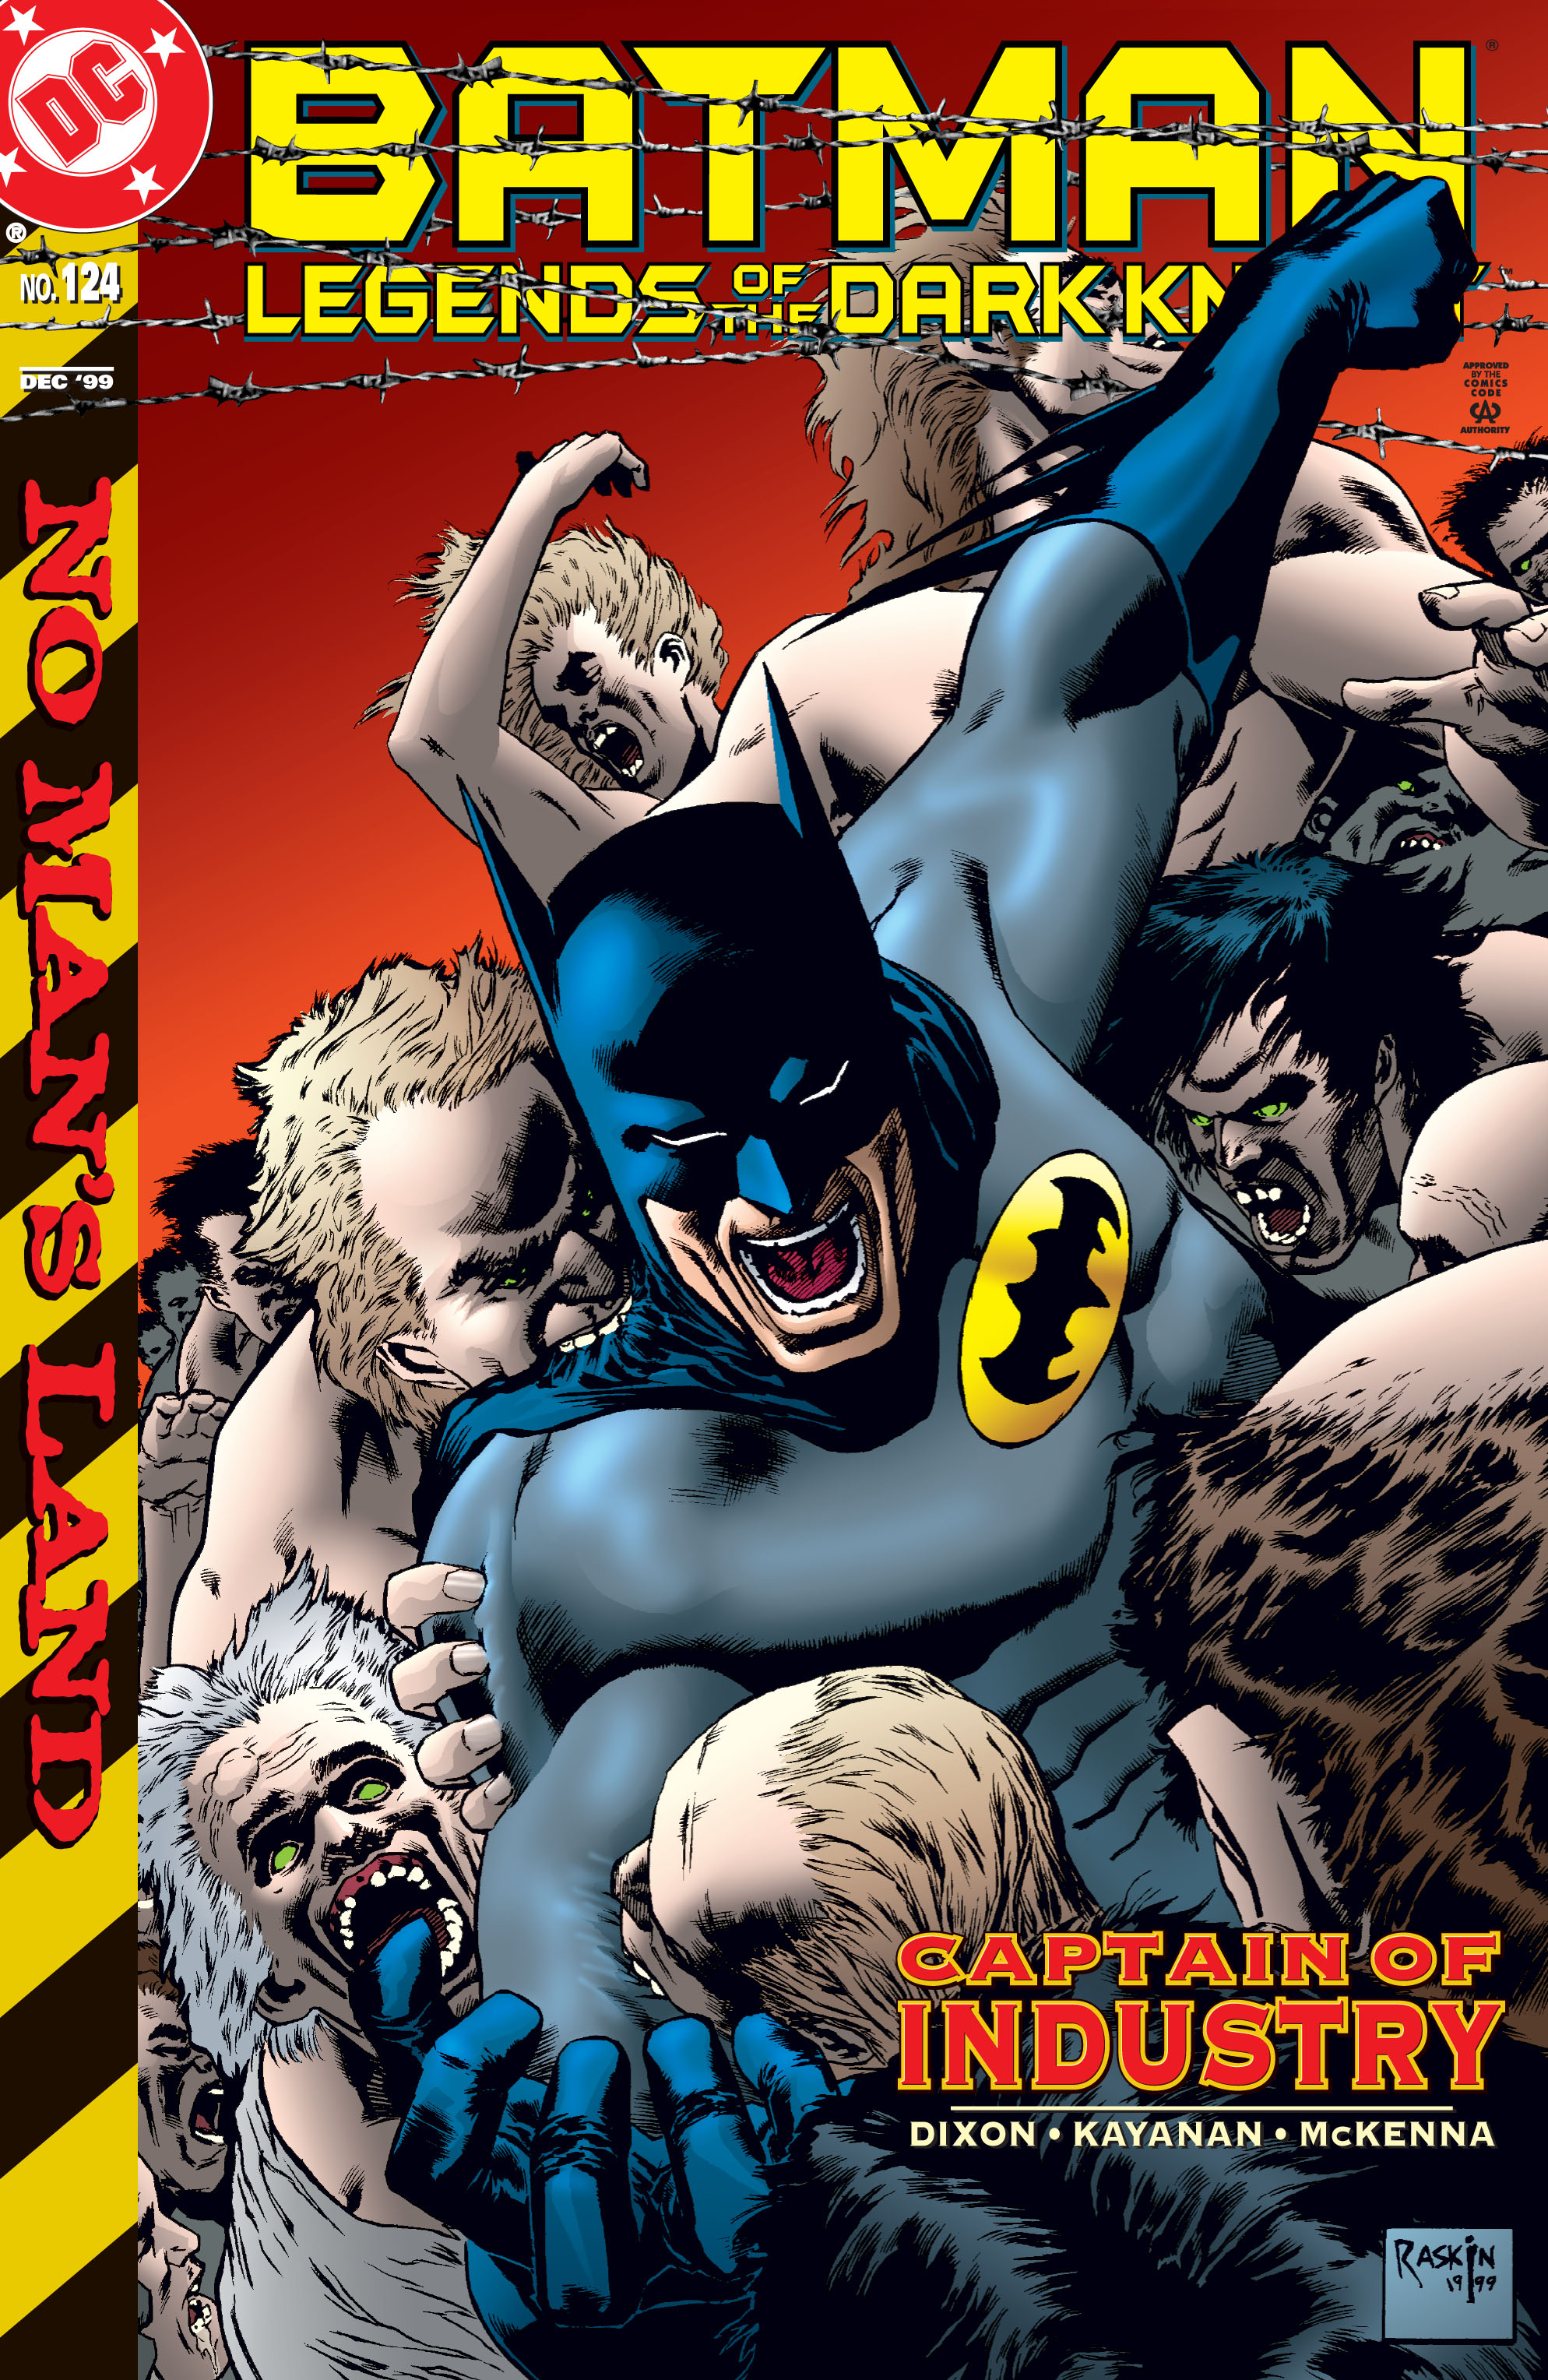 Batman Legends Of The Dark Knight Issue 124 | Read Batman Legends Of The  Dark Knight Issue 124 comic online in high quality. Read Full Comic online  for free - Read comics